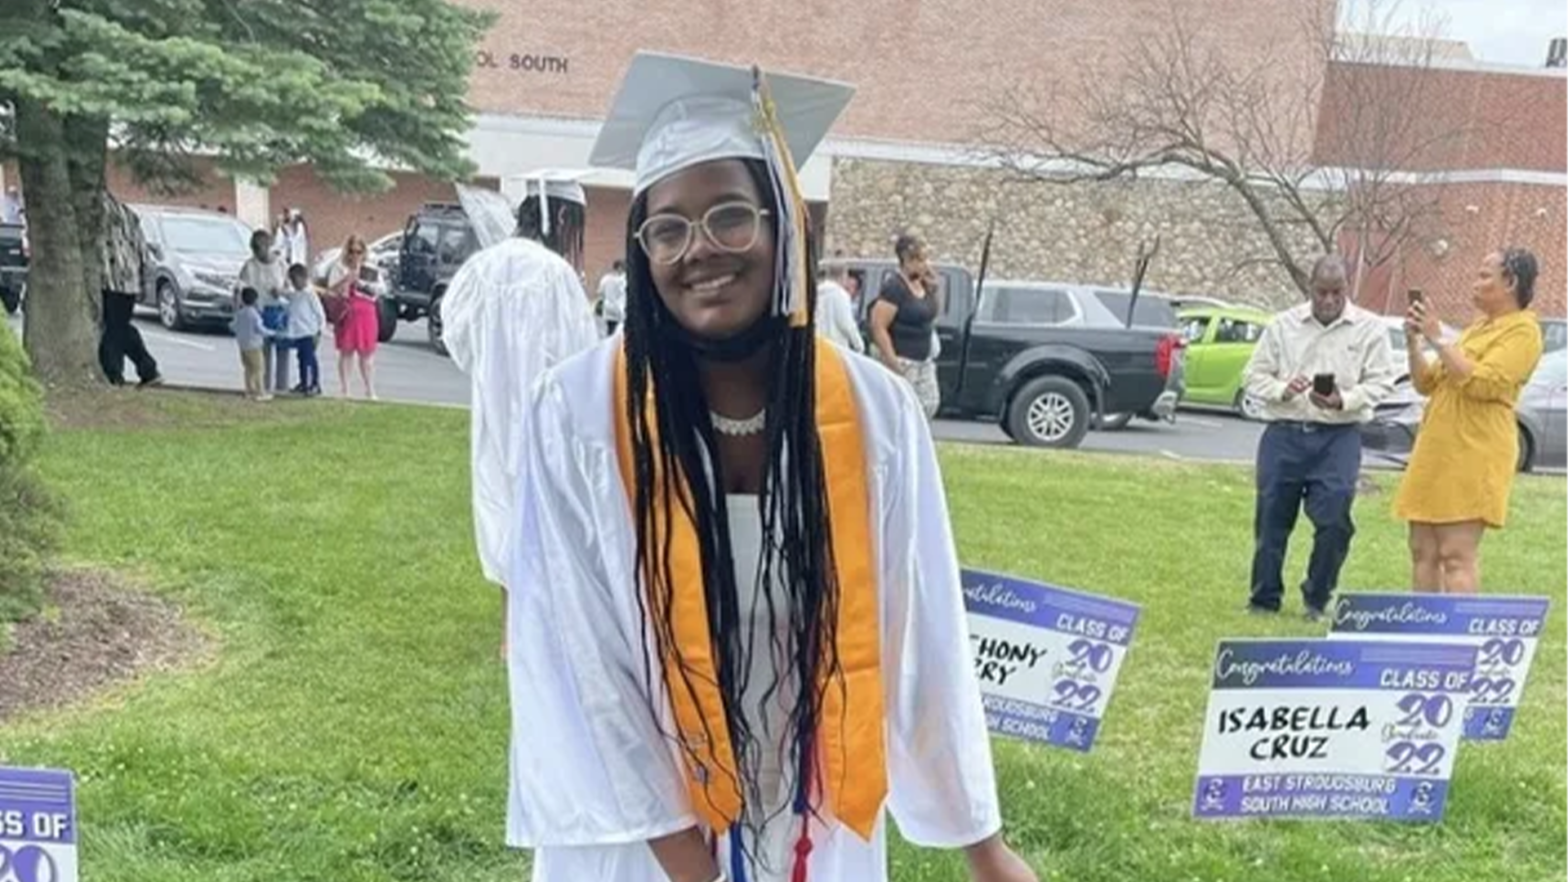 Betting On Herself Led Sydni Smith To Get Accepted Into 57 Schools With $1.8M In Scholarship Offers